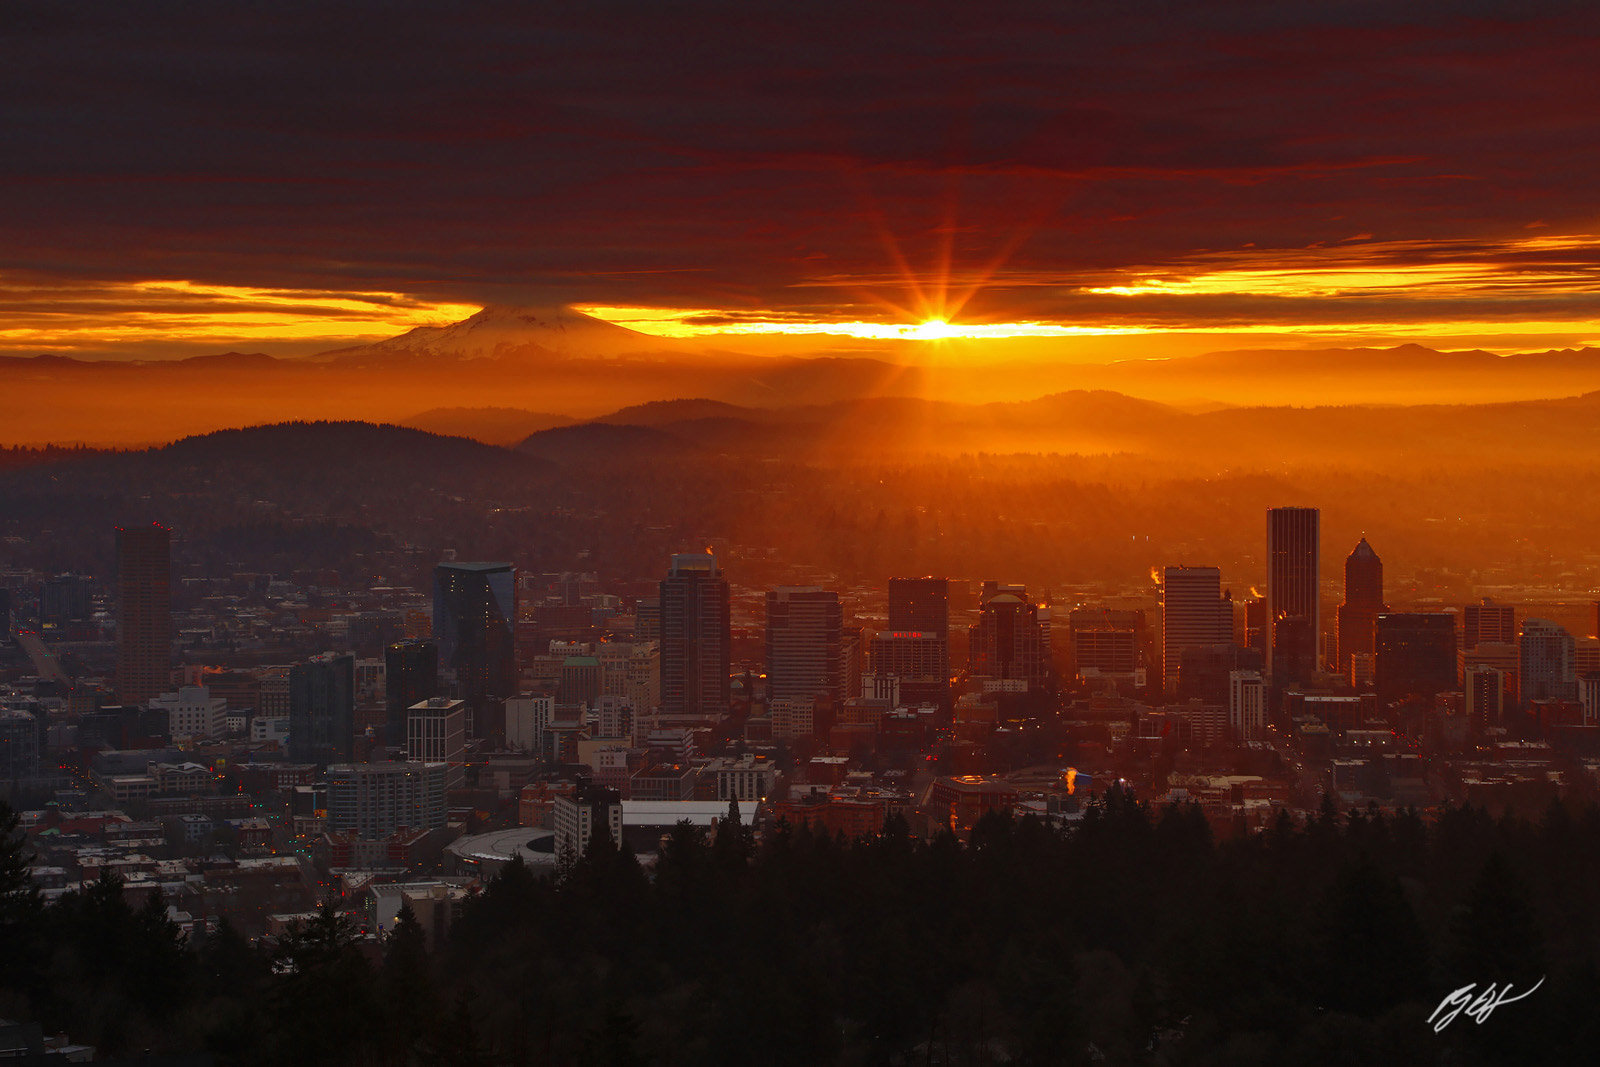 Sunrise and Sunstar over Portland with Mt Hood from the Pittock Mansion in Portland Oregon